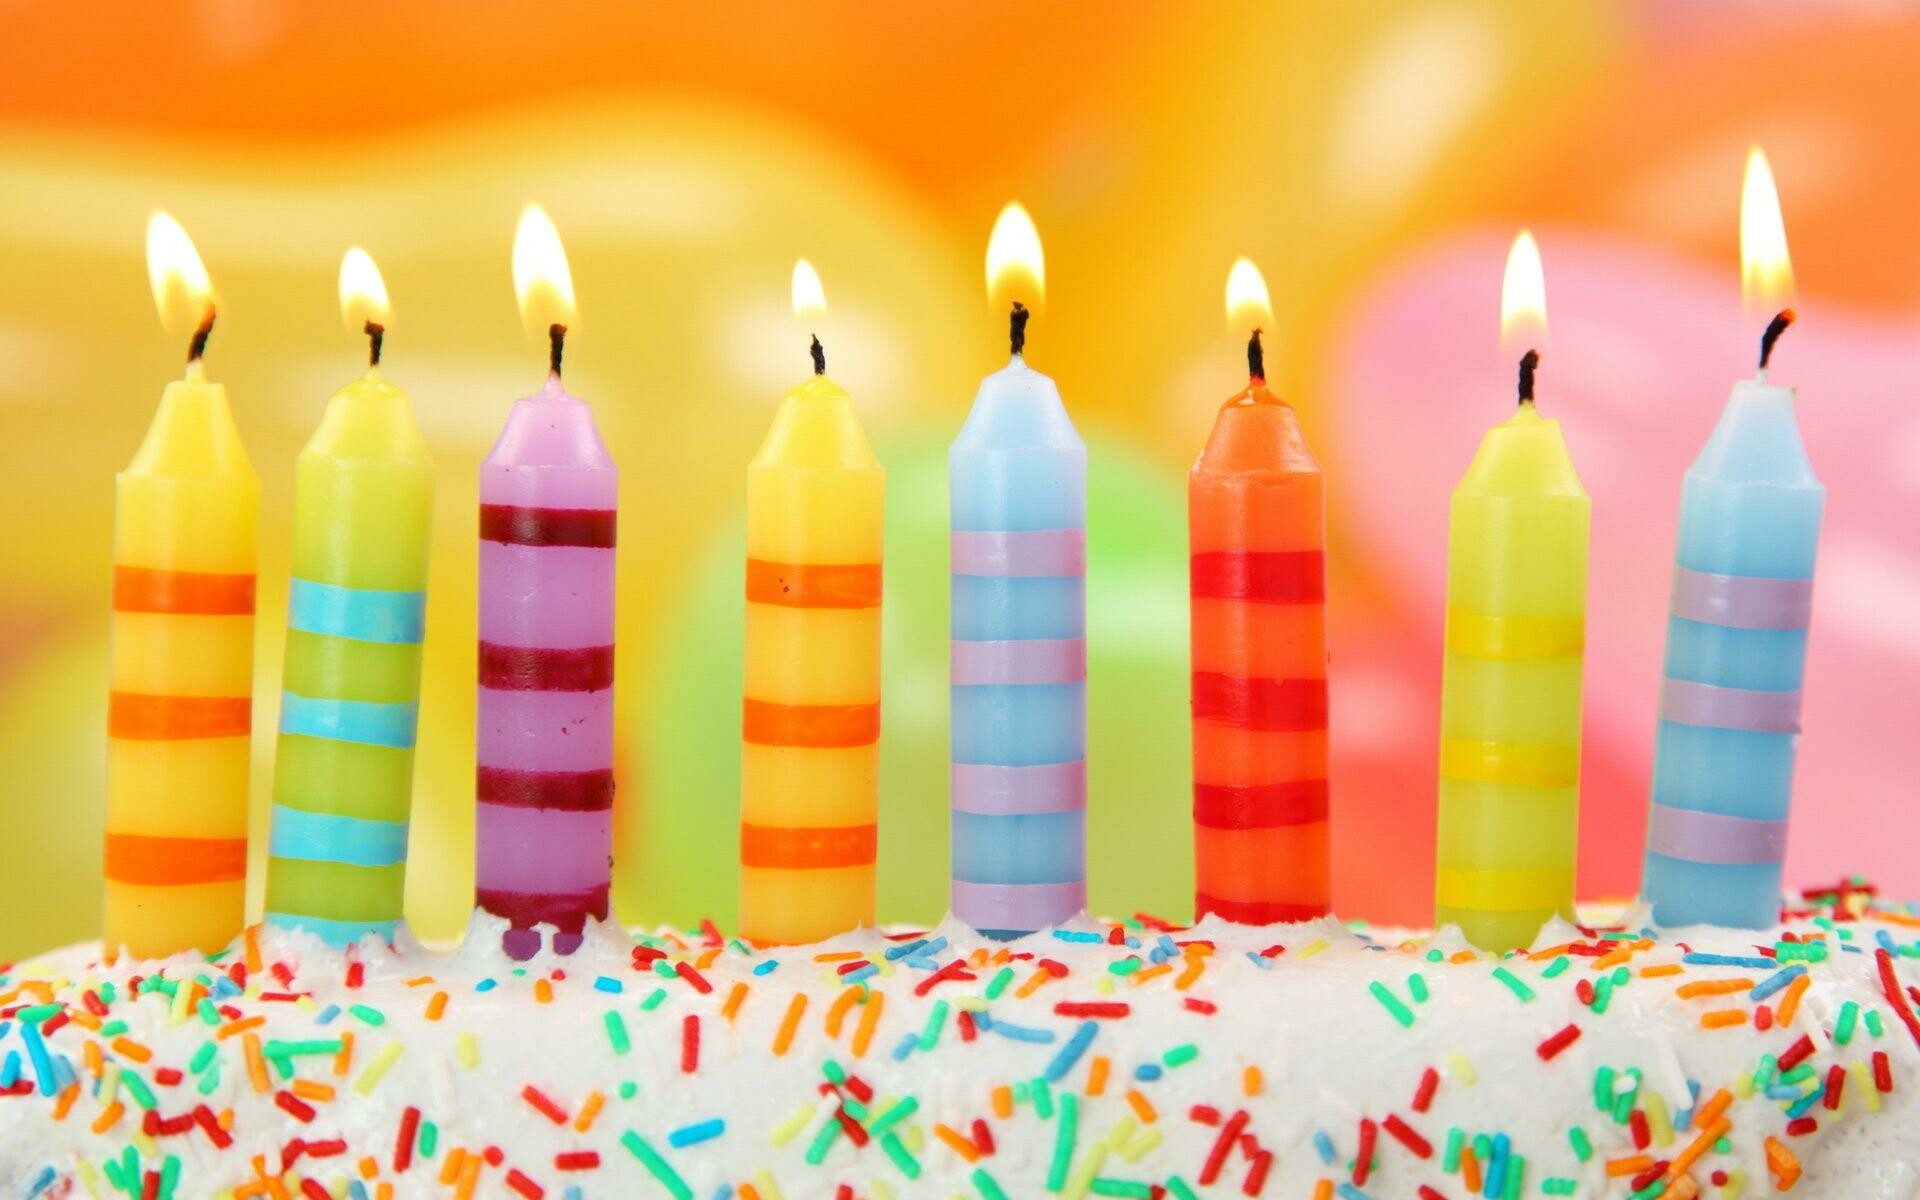 Birthday Party: Lit candles, Celebration, Sweets, Sprinkles. 1920x1200 HD Background.